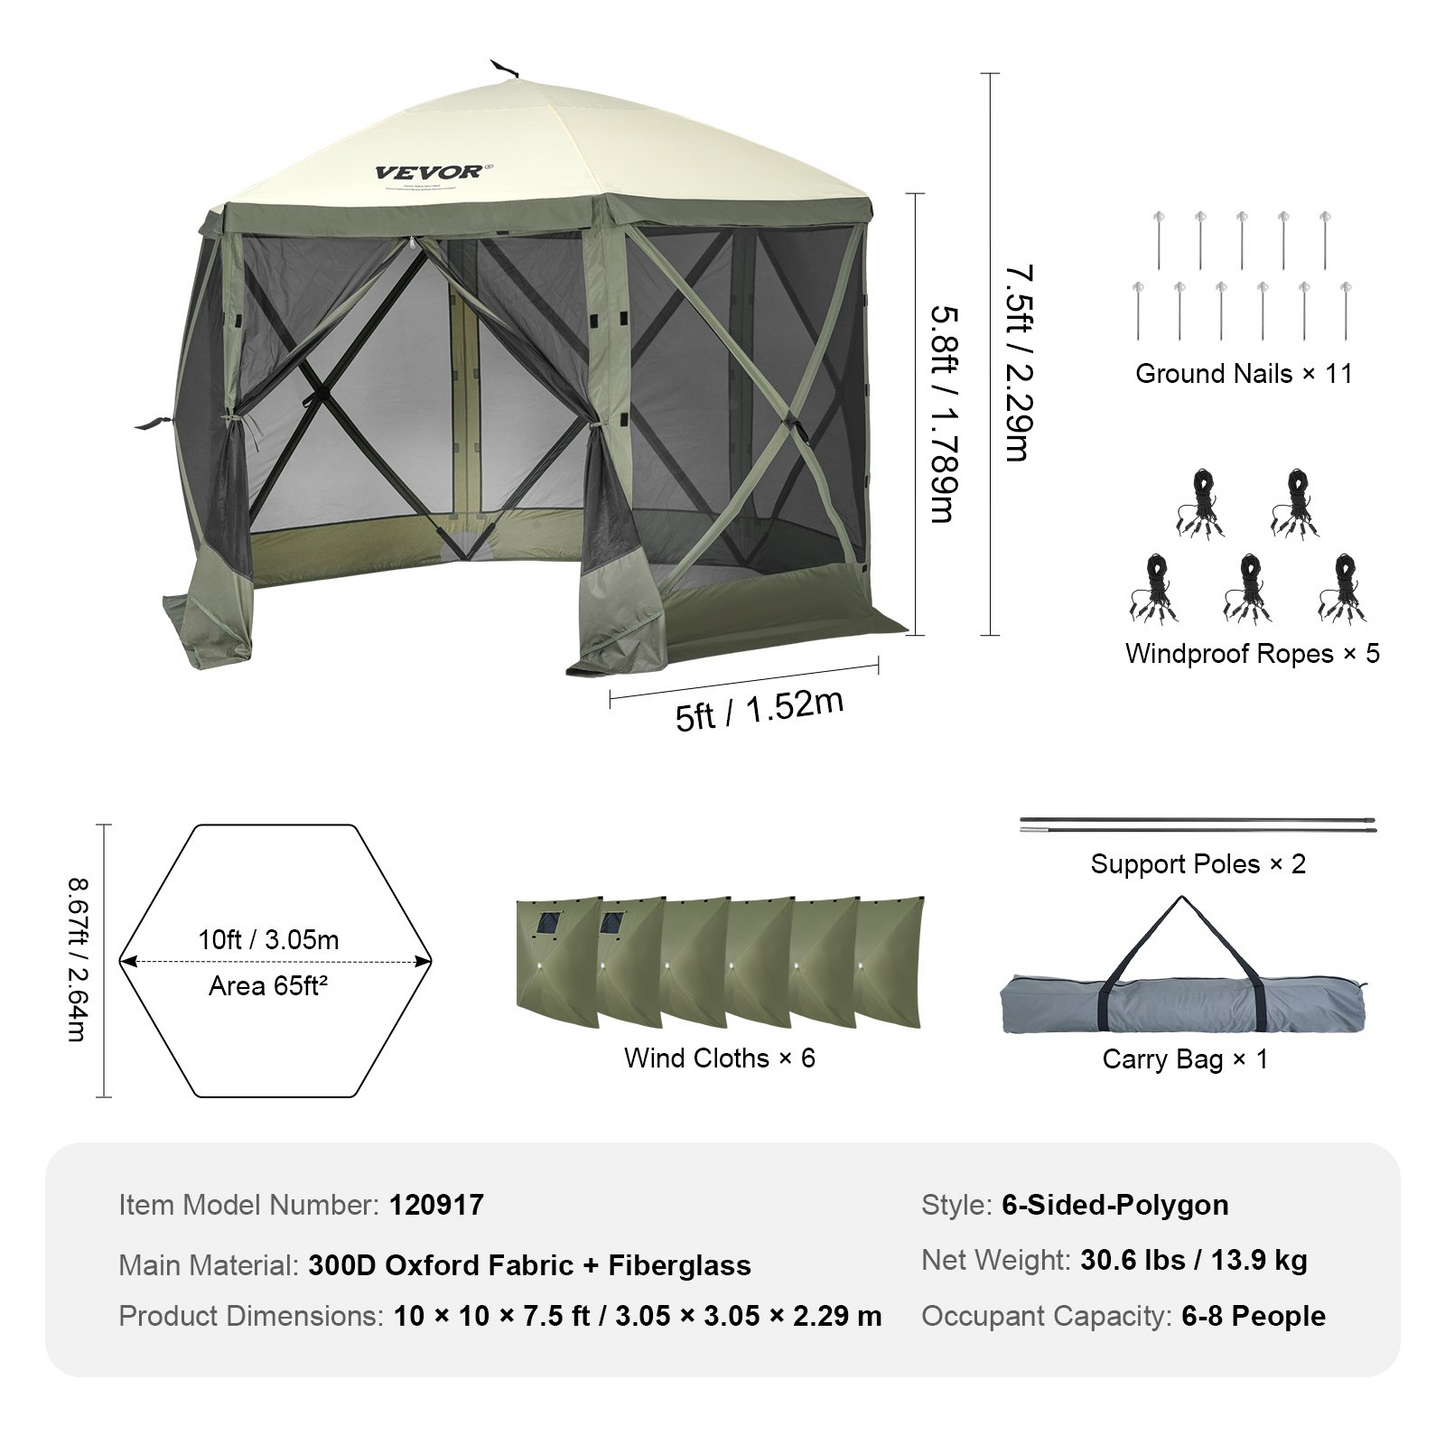 VEVOR Pop Up Gazebo Tent, Pop-Up Screen Tent 6 Sided Canopy Sun Shelter with 6 Removable Privacy Wind Cloths & Mesh Windows, 10x10FT Quick Set Screen Tent with Mosquito Netting, Army Green, Goodies N Stuff